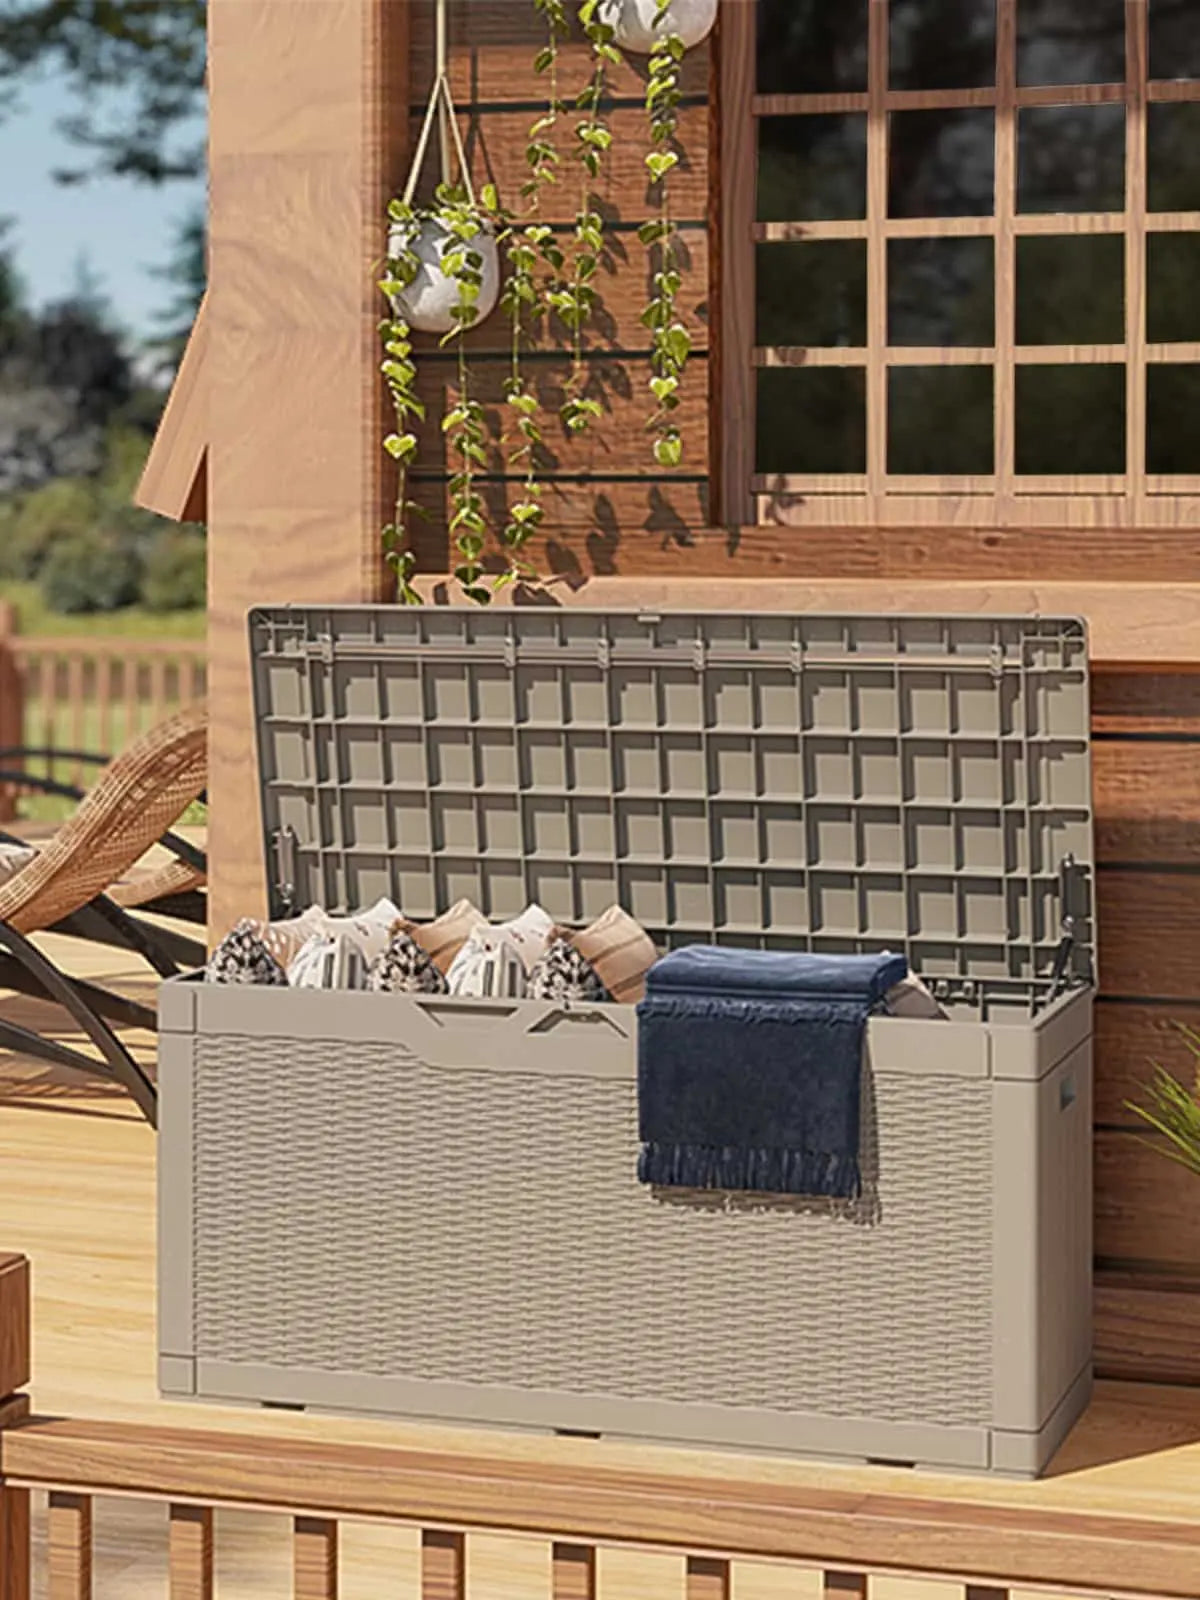 The 100 gallon ourdoor storage deck box is filled with patio supplies and standing in the patio